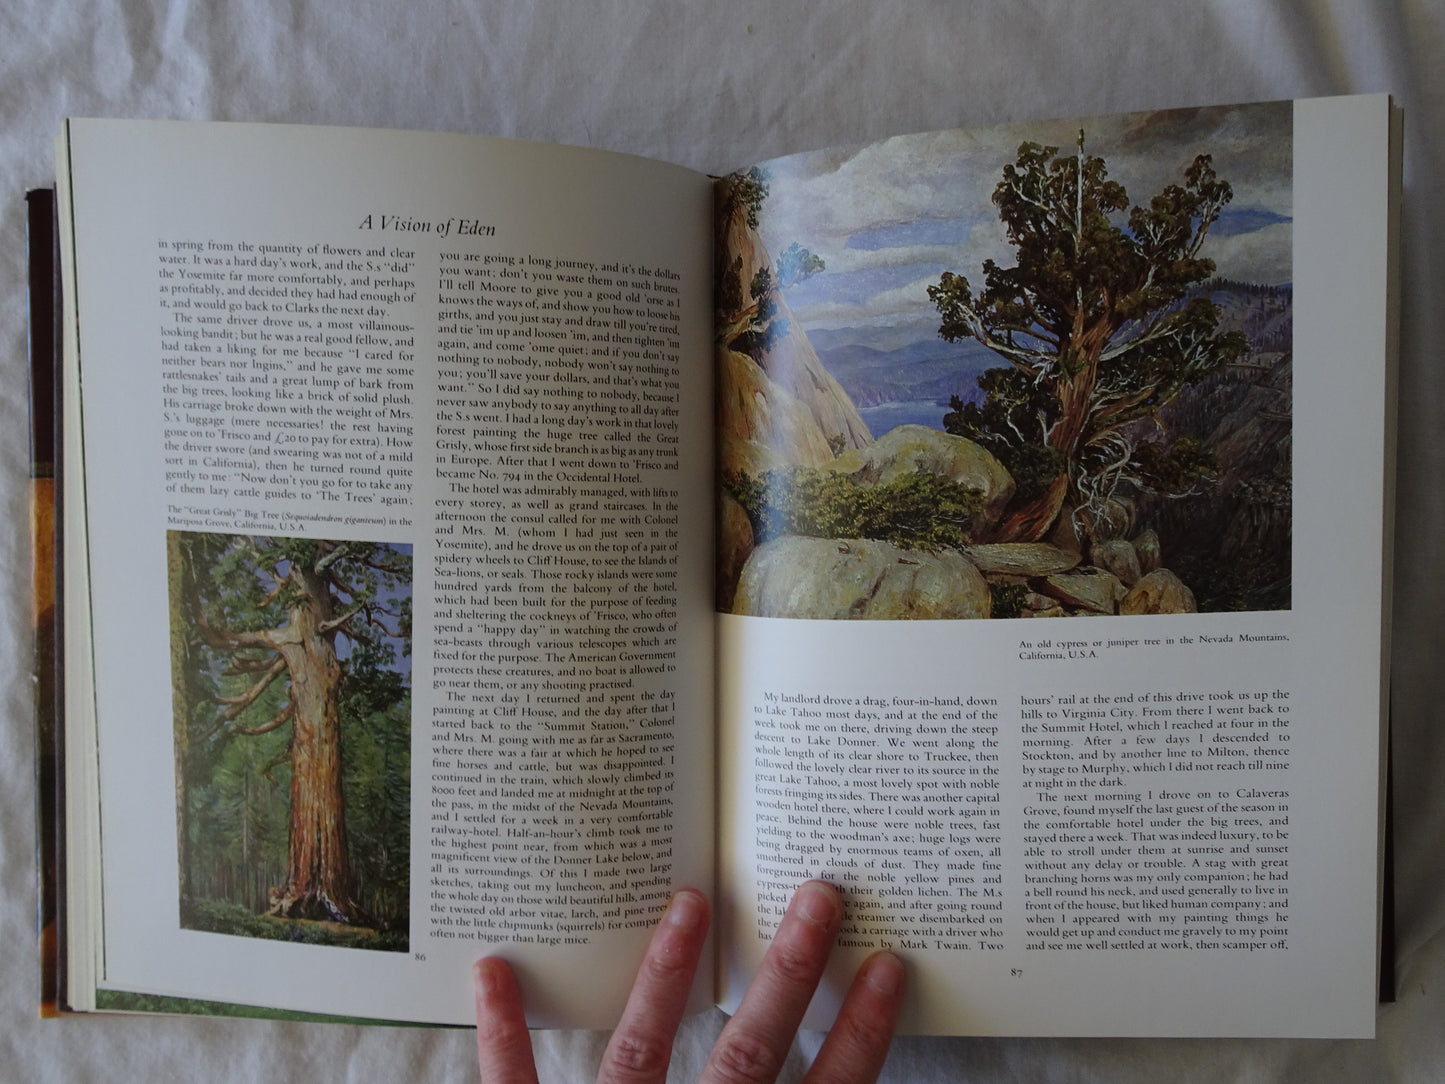 A Vision of Eden by Marianne North